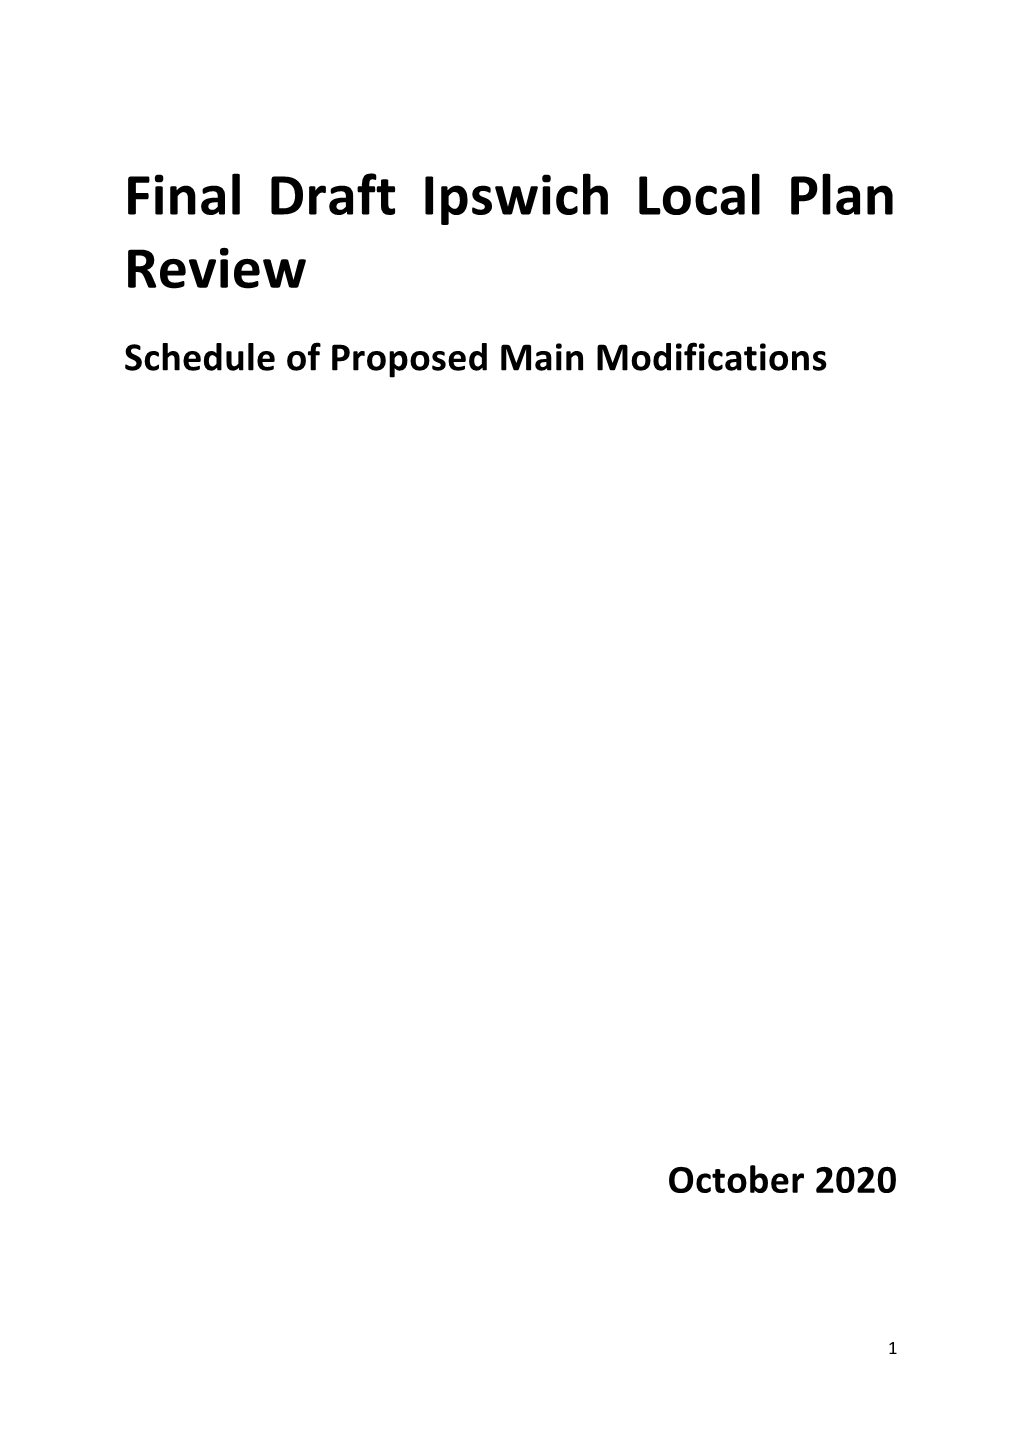 Final Draft Ipswich Local Plan Review Schedule of Proposed Main Modifications